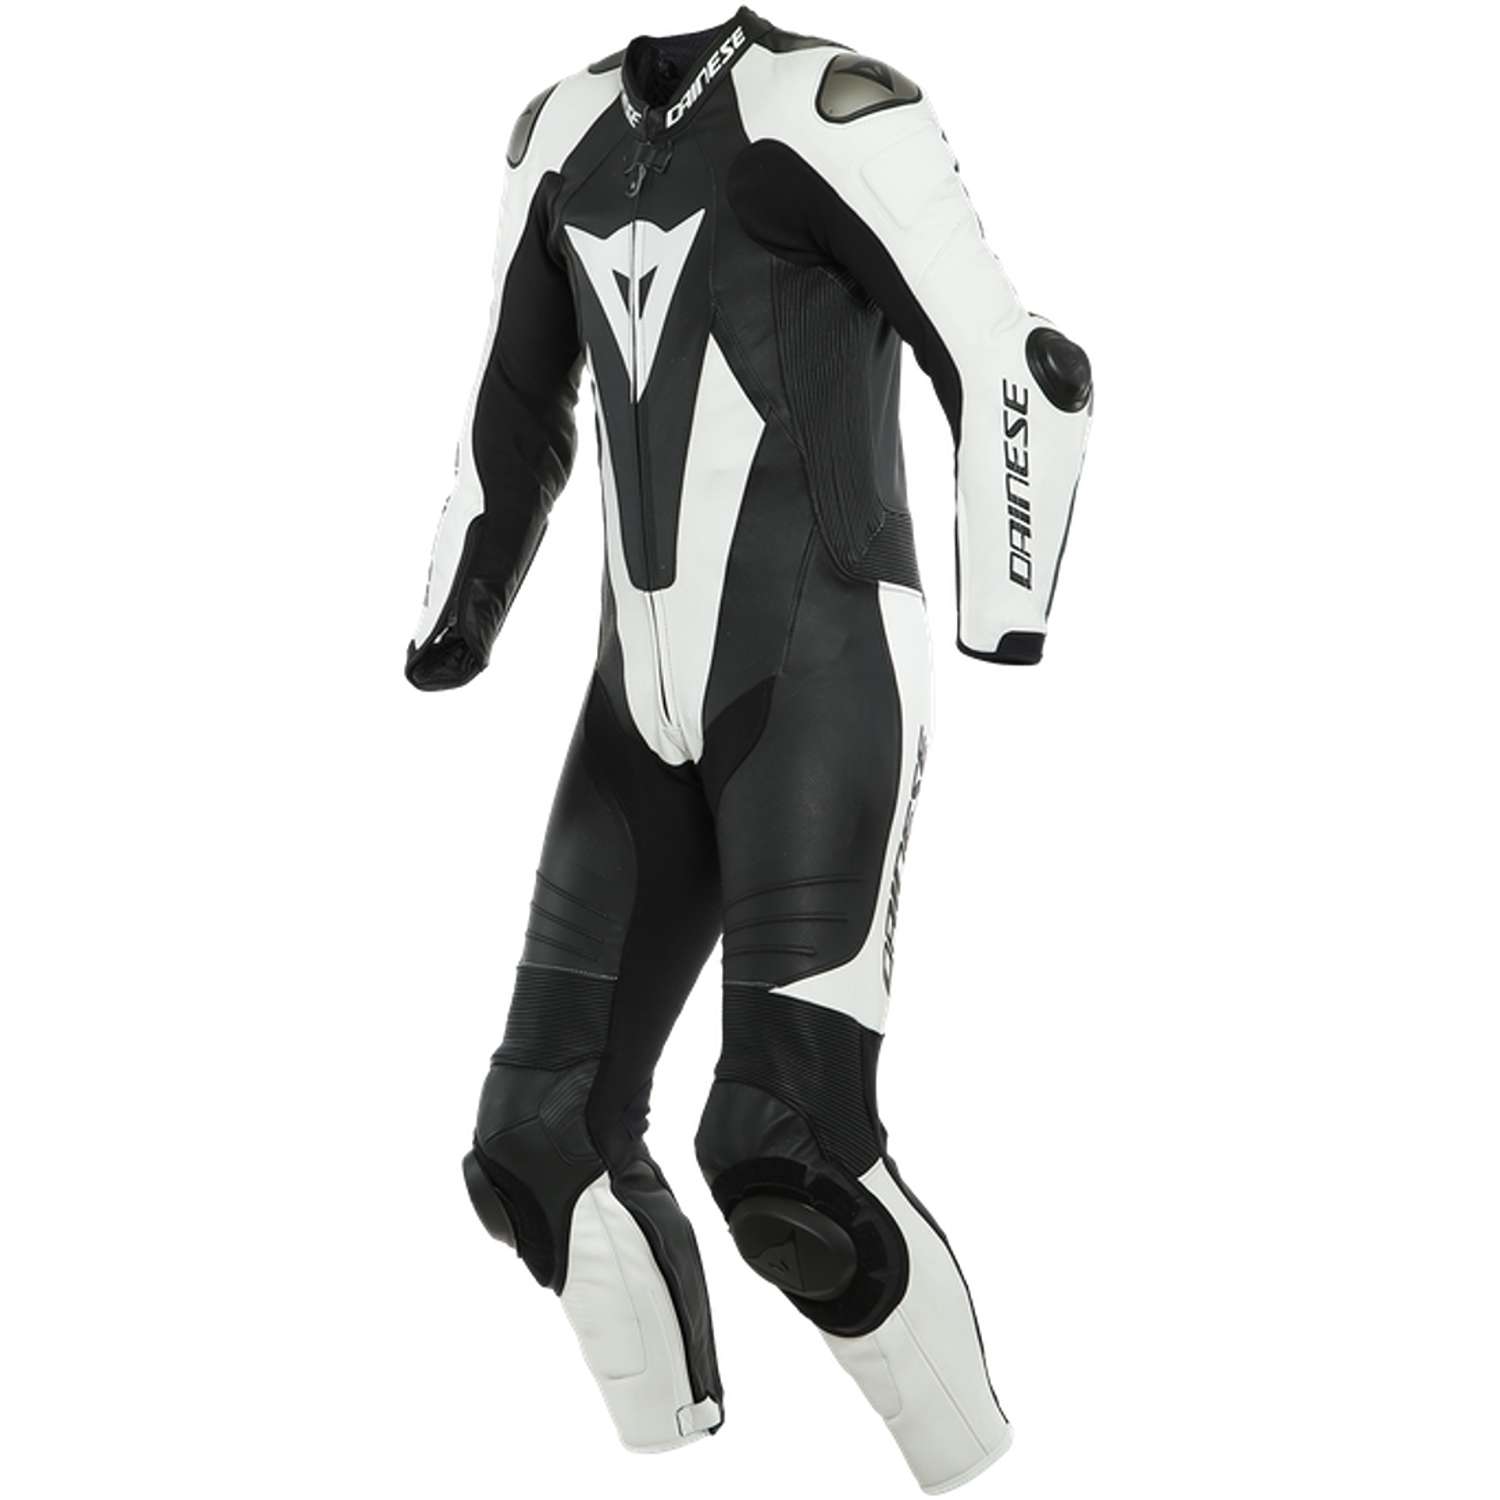 Image of Dainese Laguna Seca 5 1Pc Leather Suit Perf S/T Black White Größe 24